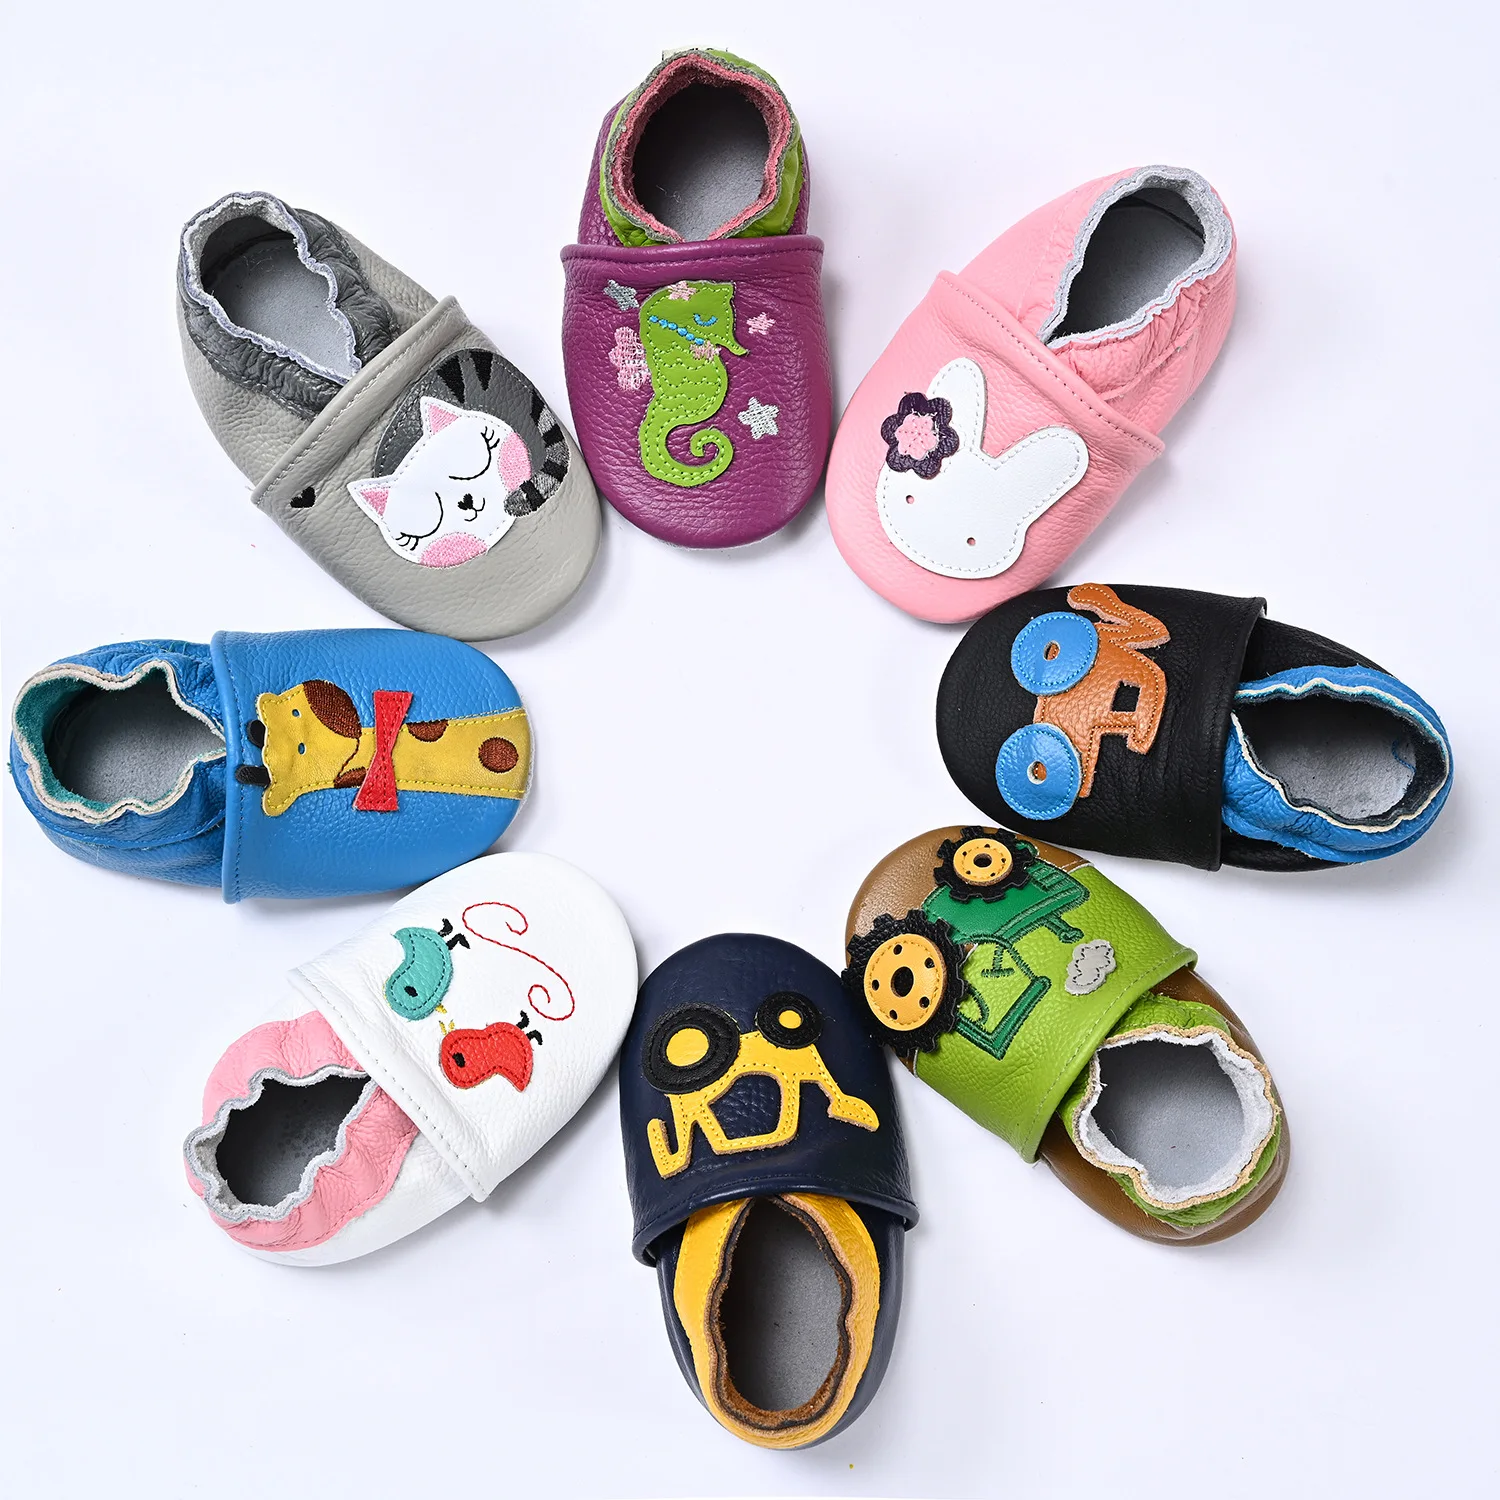 Baby Shoes Chaussure Bebe Fille Newborn Newborn Calcetines Antideslizante Bebe Leather Shoes for Baby Slippers for Gir 1